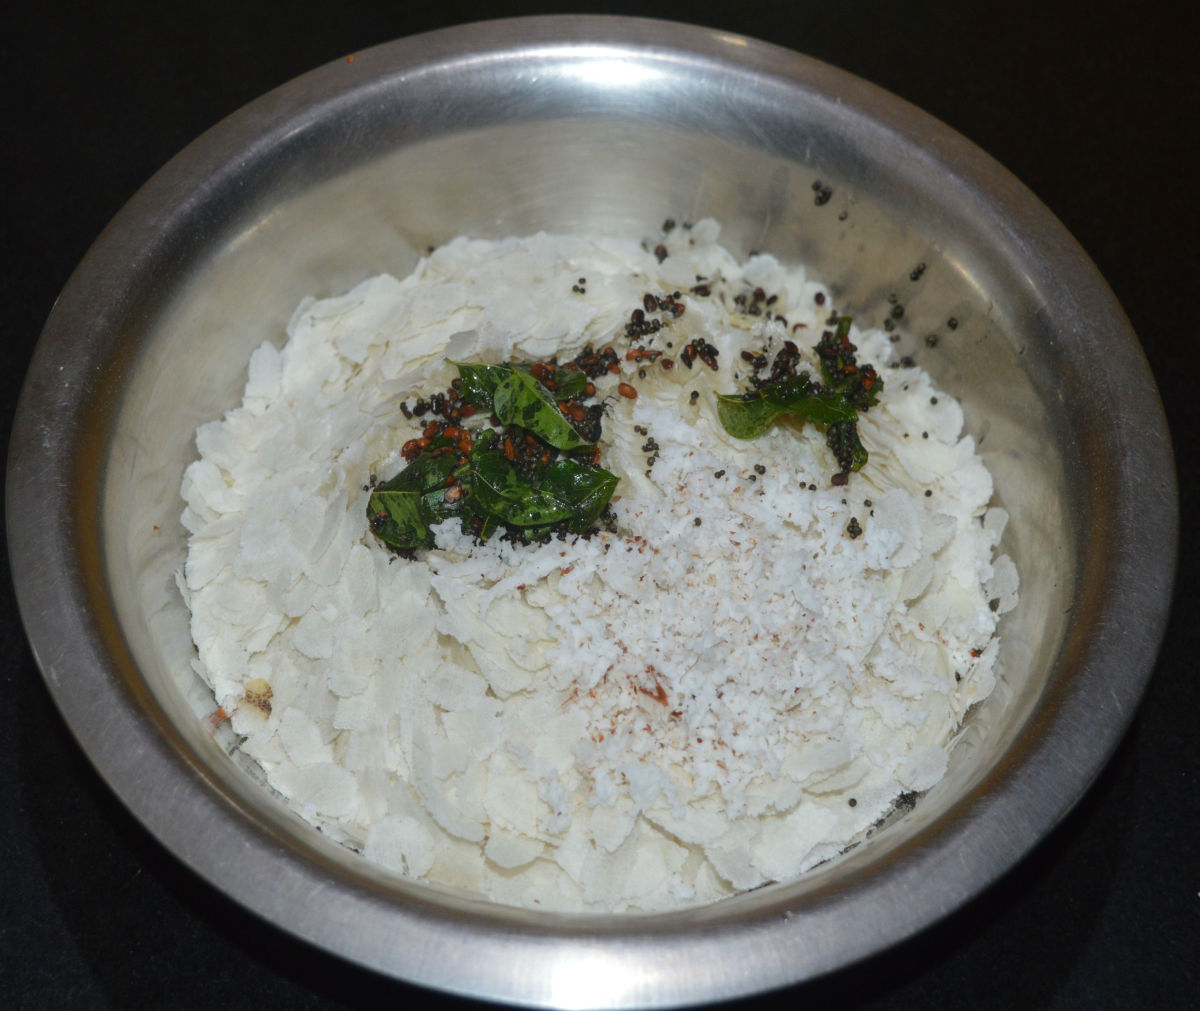 Add the tempering to the bowl containing flattened rice and the masala paste. Add the remaining grated coconut.